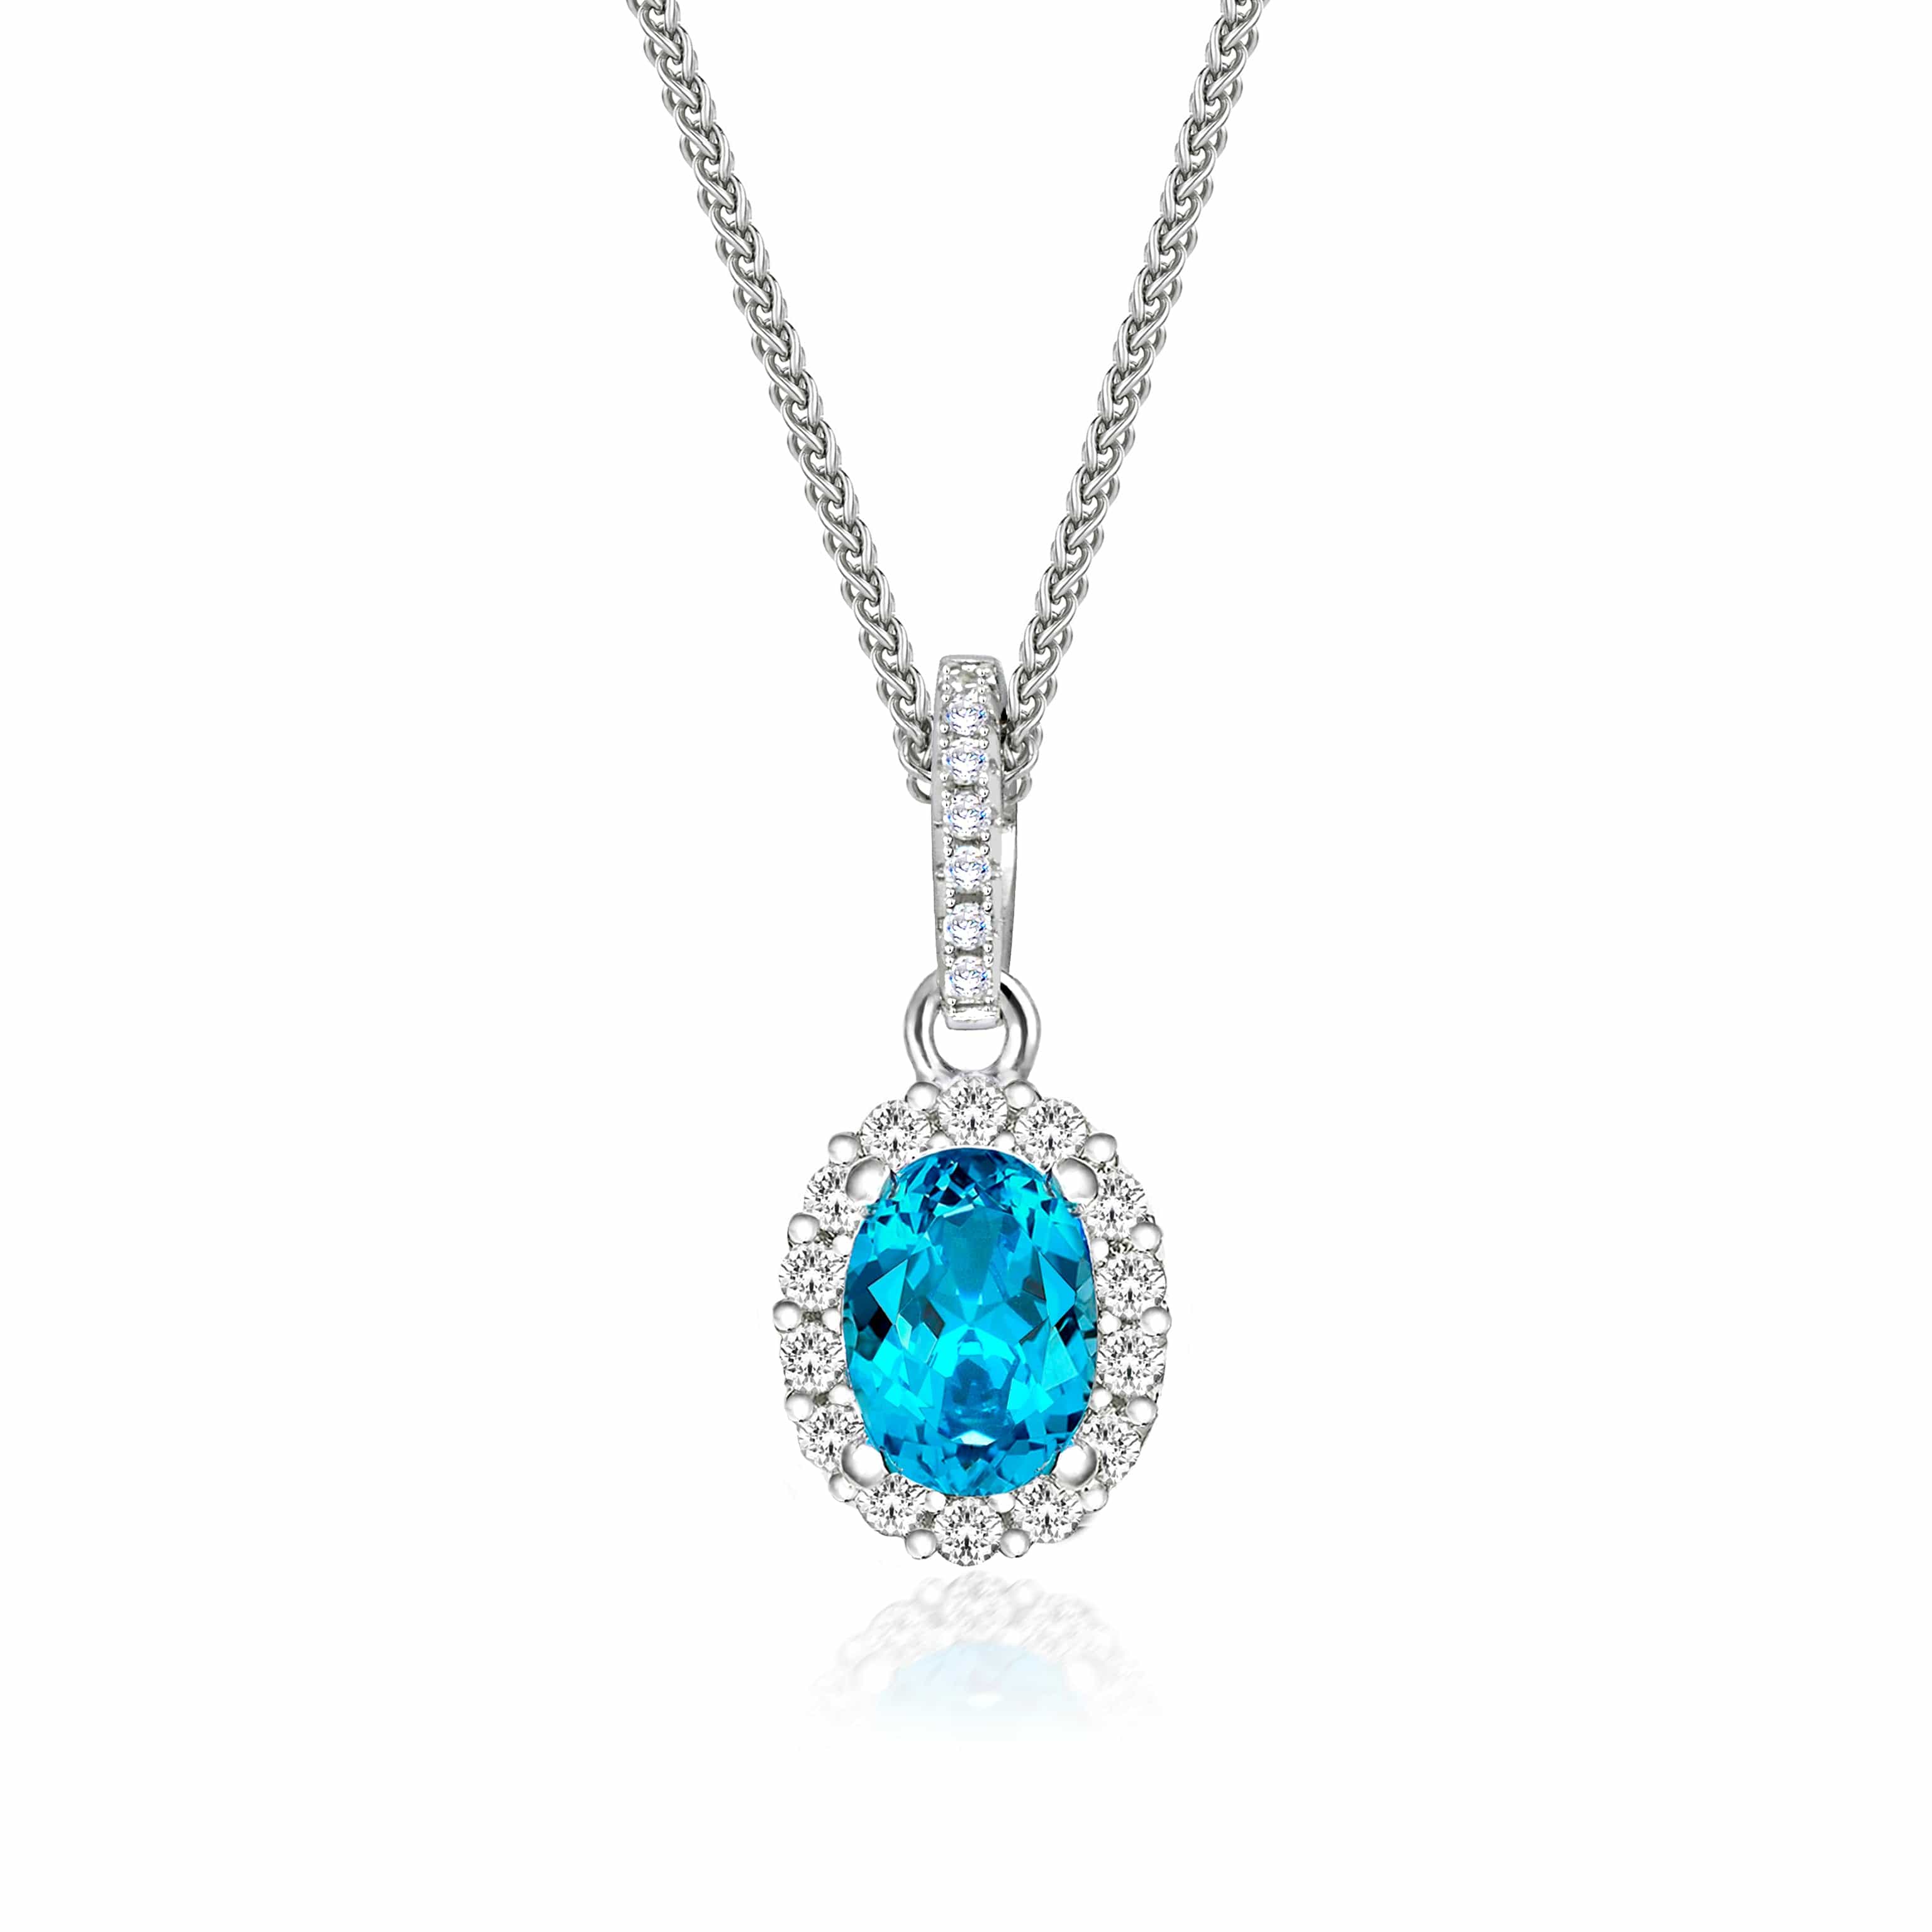 Lynora Silver Pendant Opulence Necklace Sterling Silver & Swiss Blue Stone